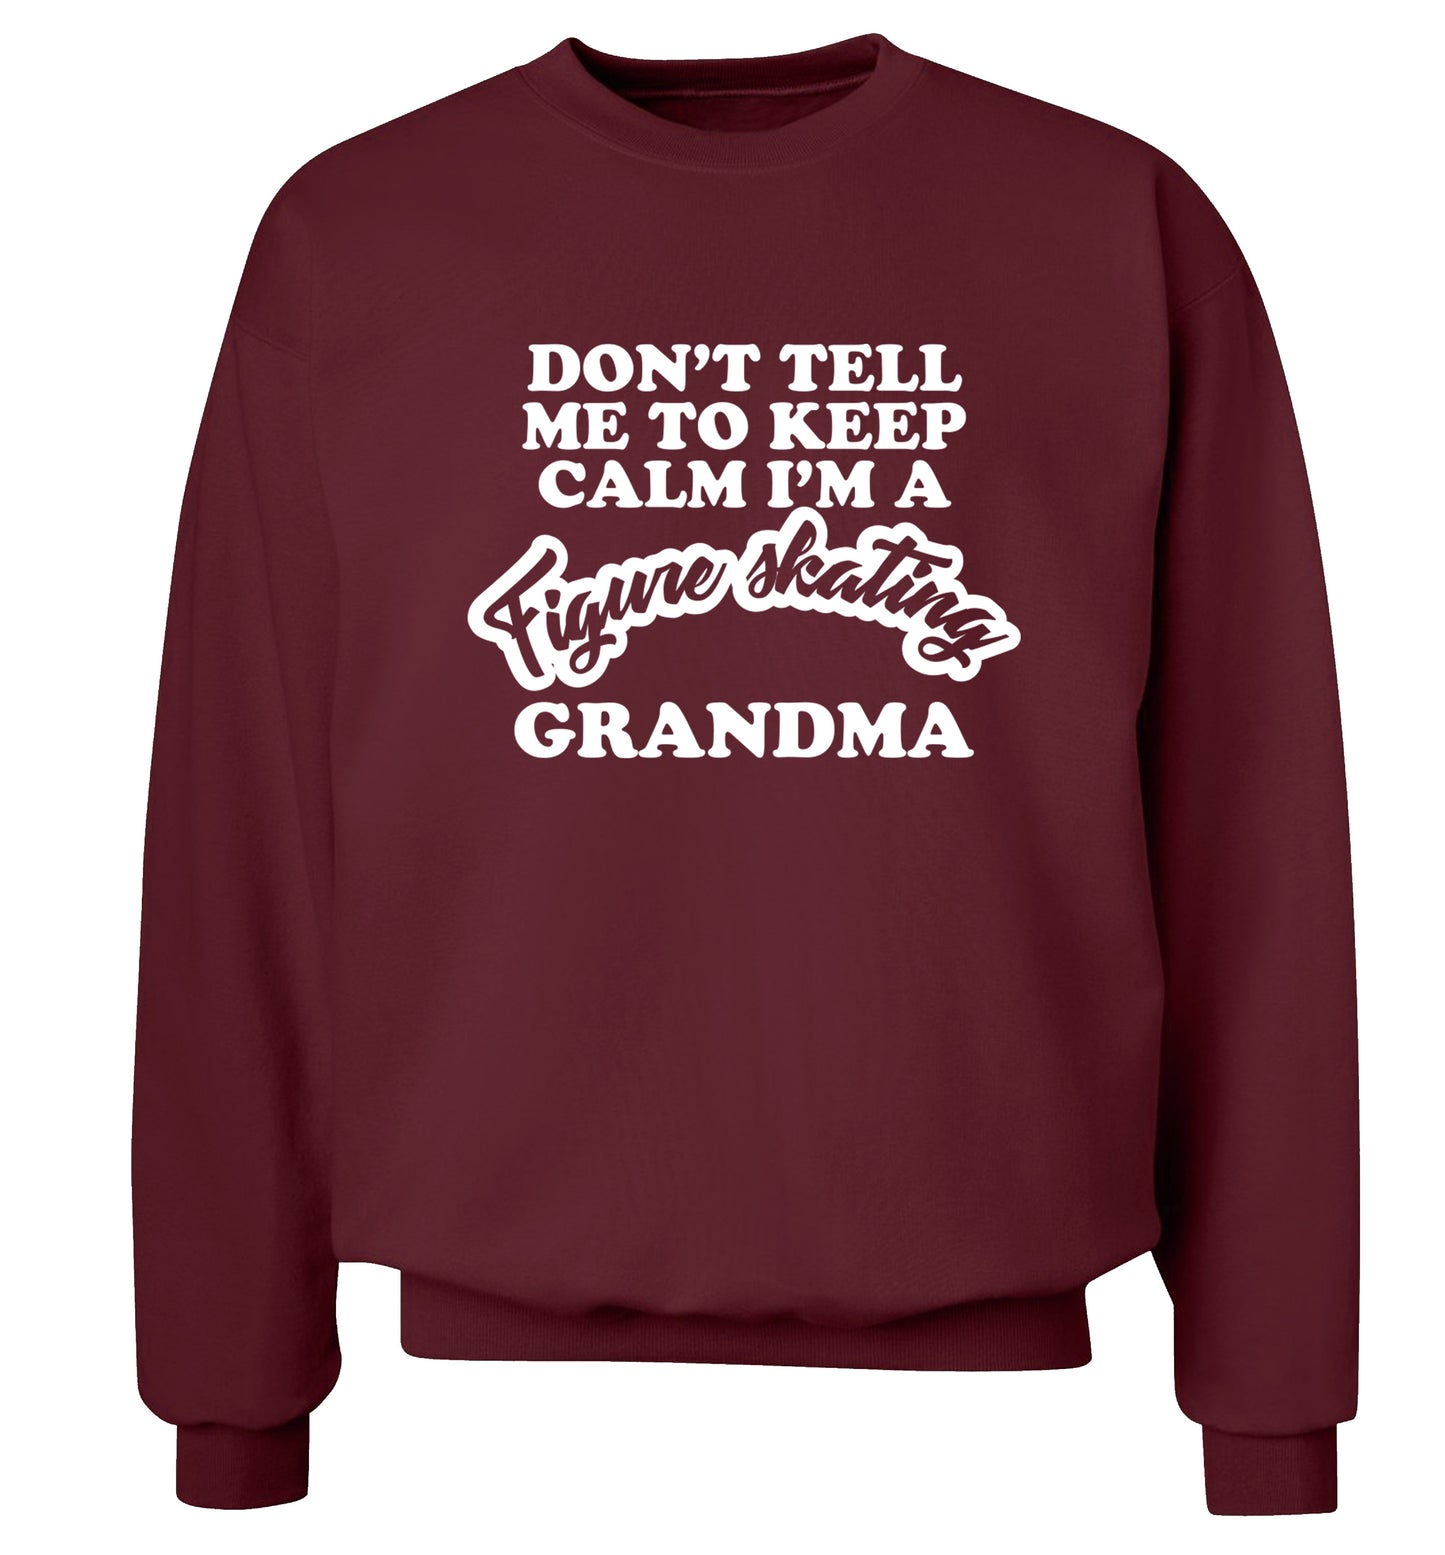 Don't tell me to keep calm I'm a figure skating grandma Adult's unisexmaroon Sweater 2XL